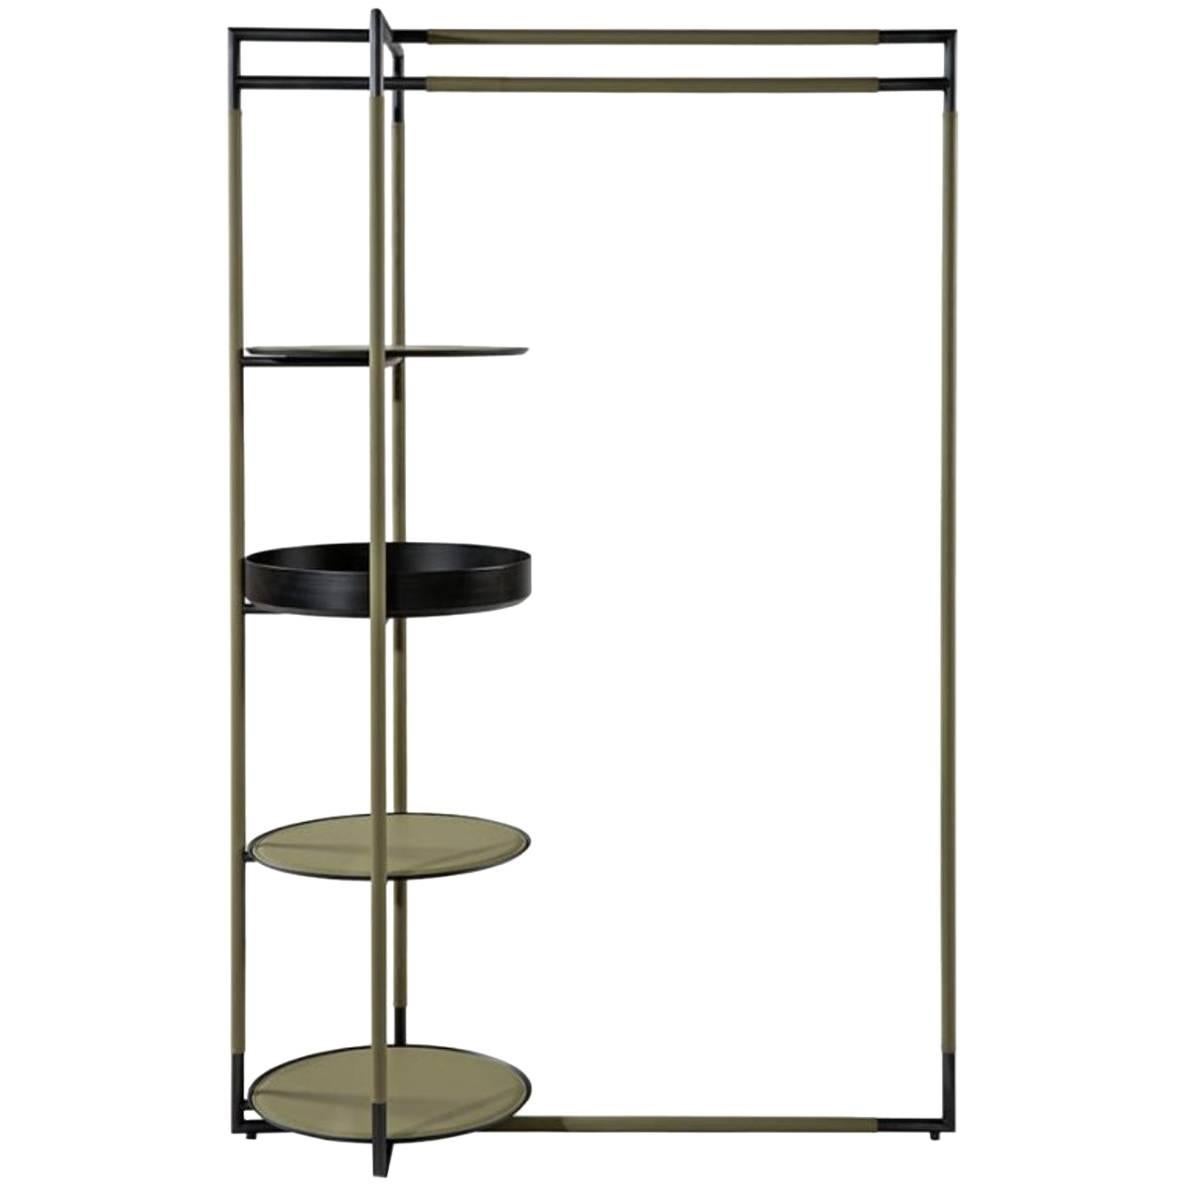 Bak Valet Stand by Ferruccio Lavi in Leather and Steel in Various Colors For Sale